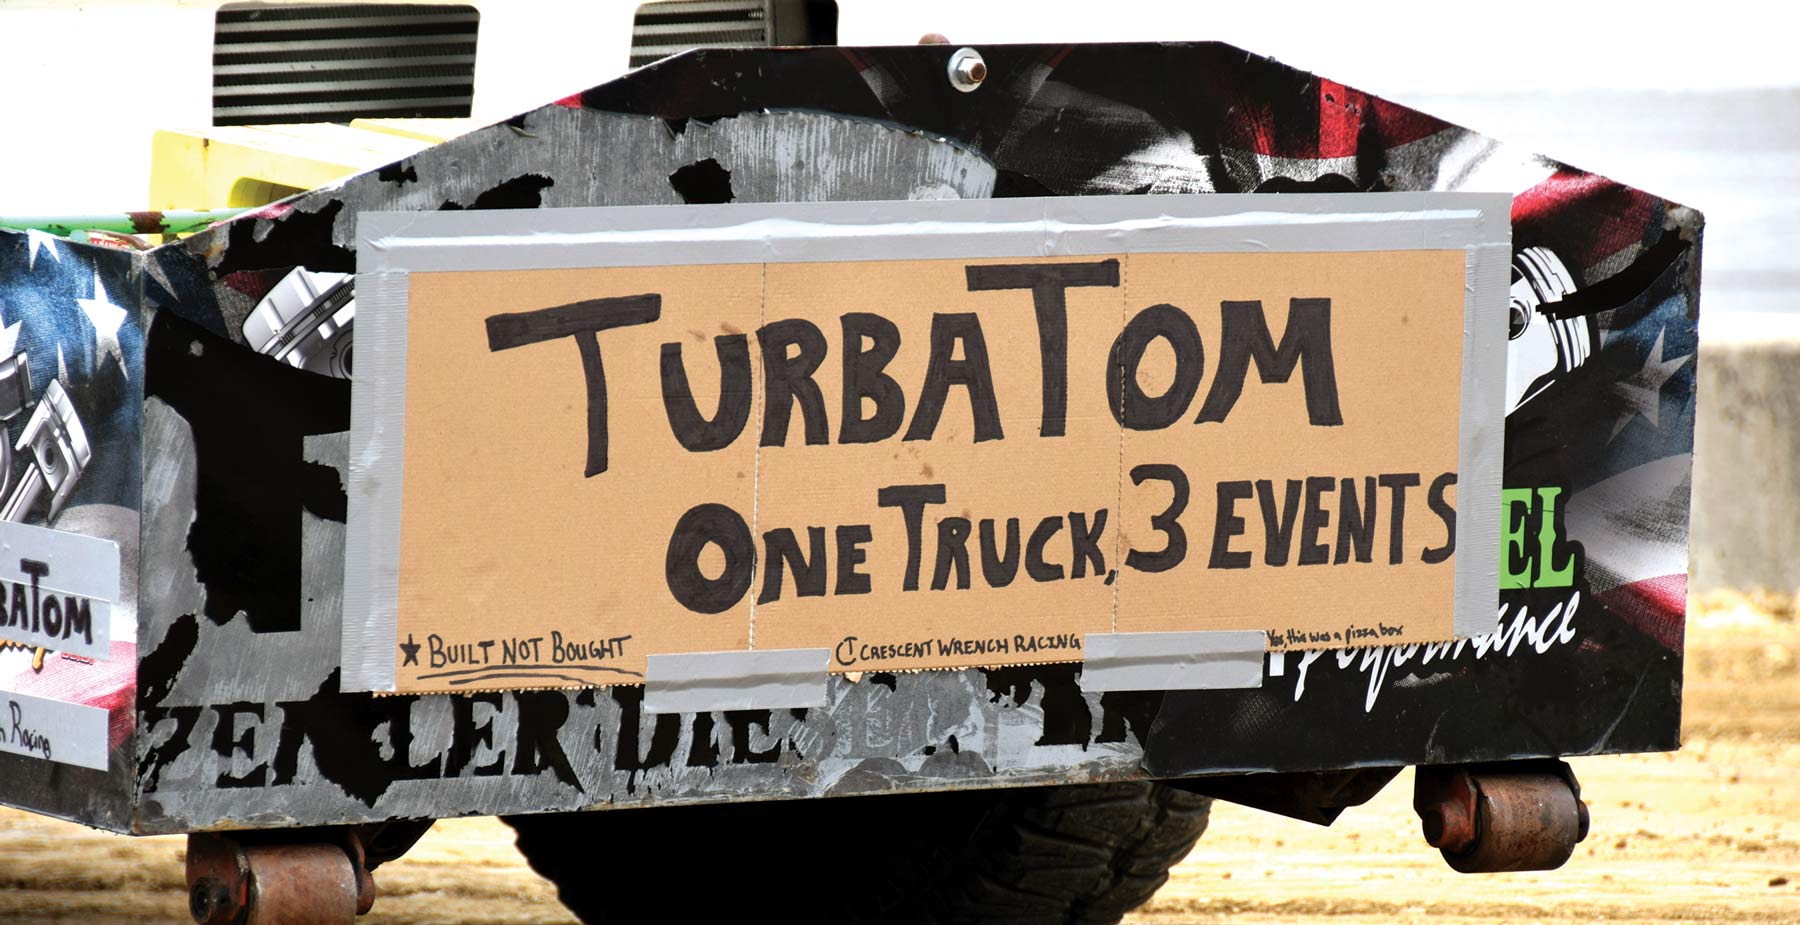 taped cardboard sign that says "TurbaTom: One Truck, 3 Events"